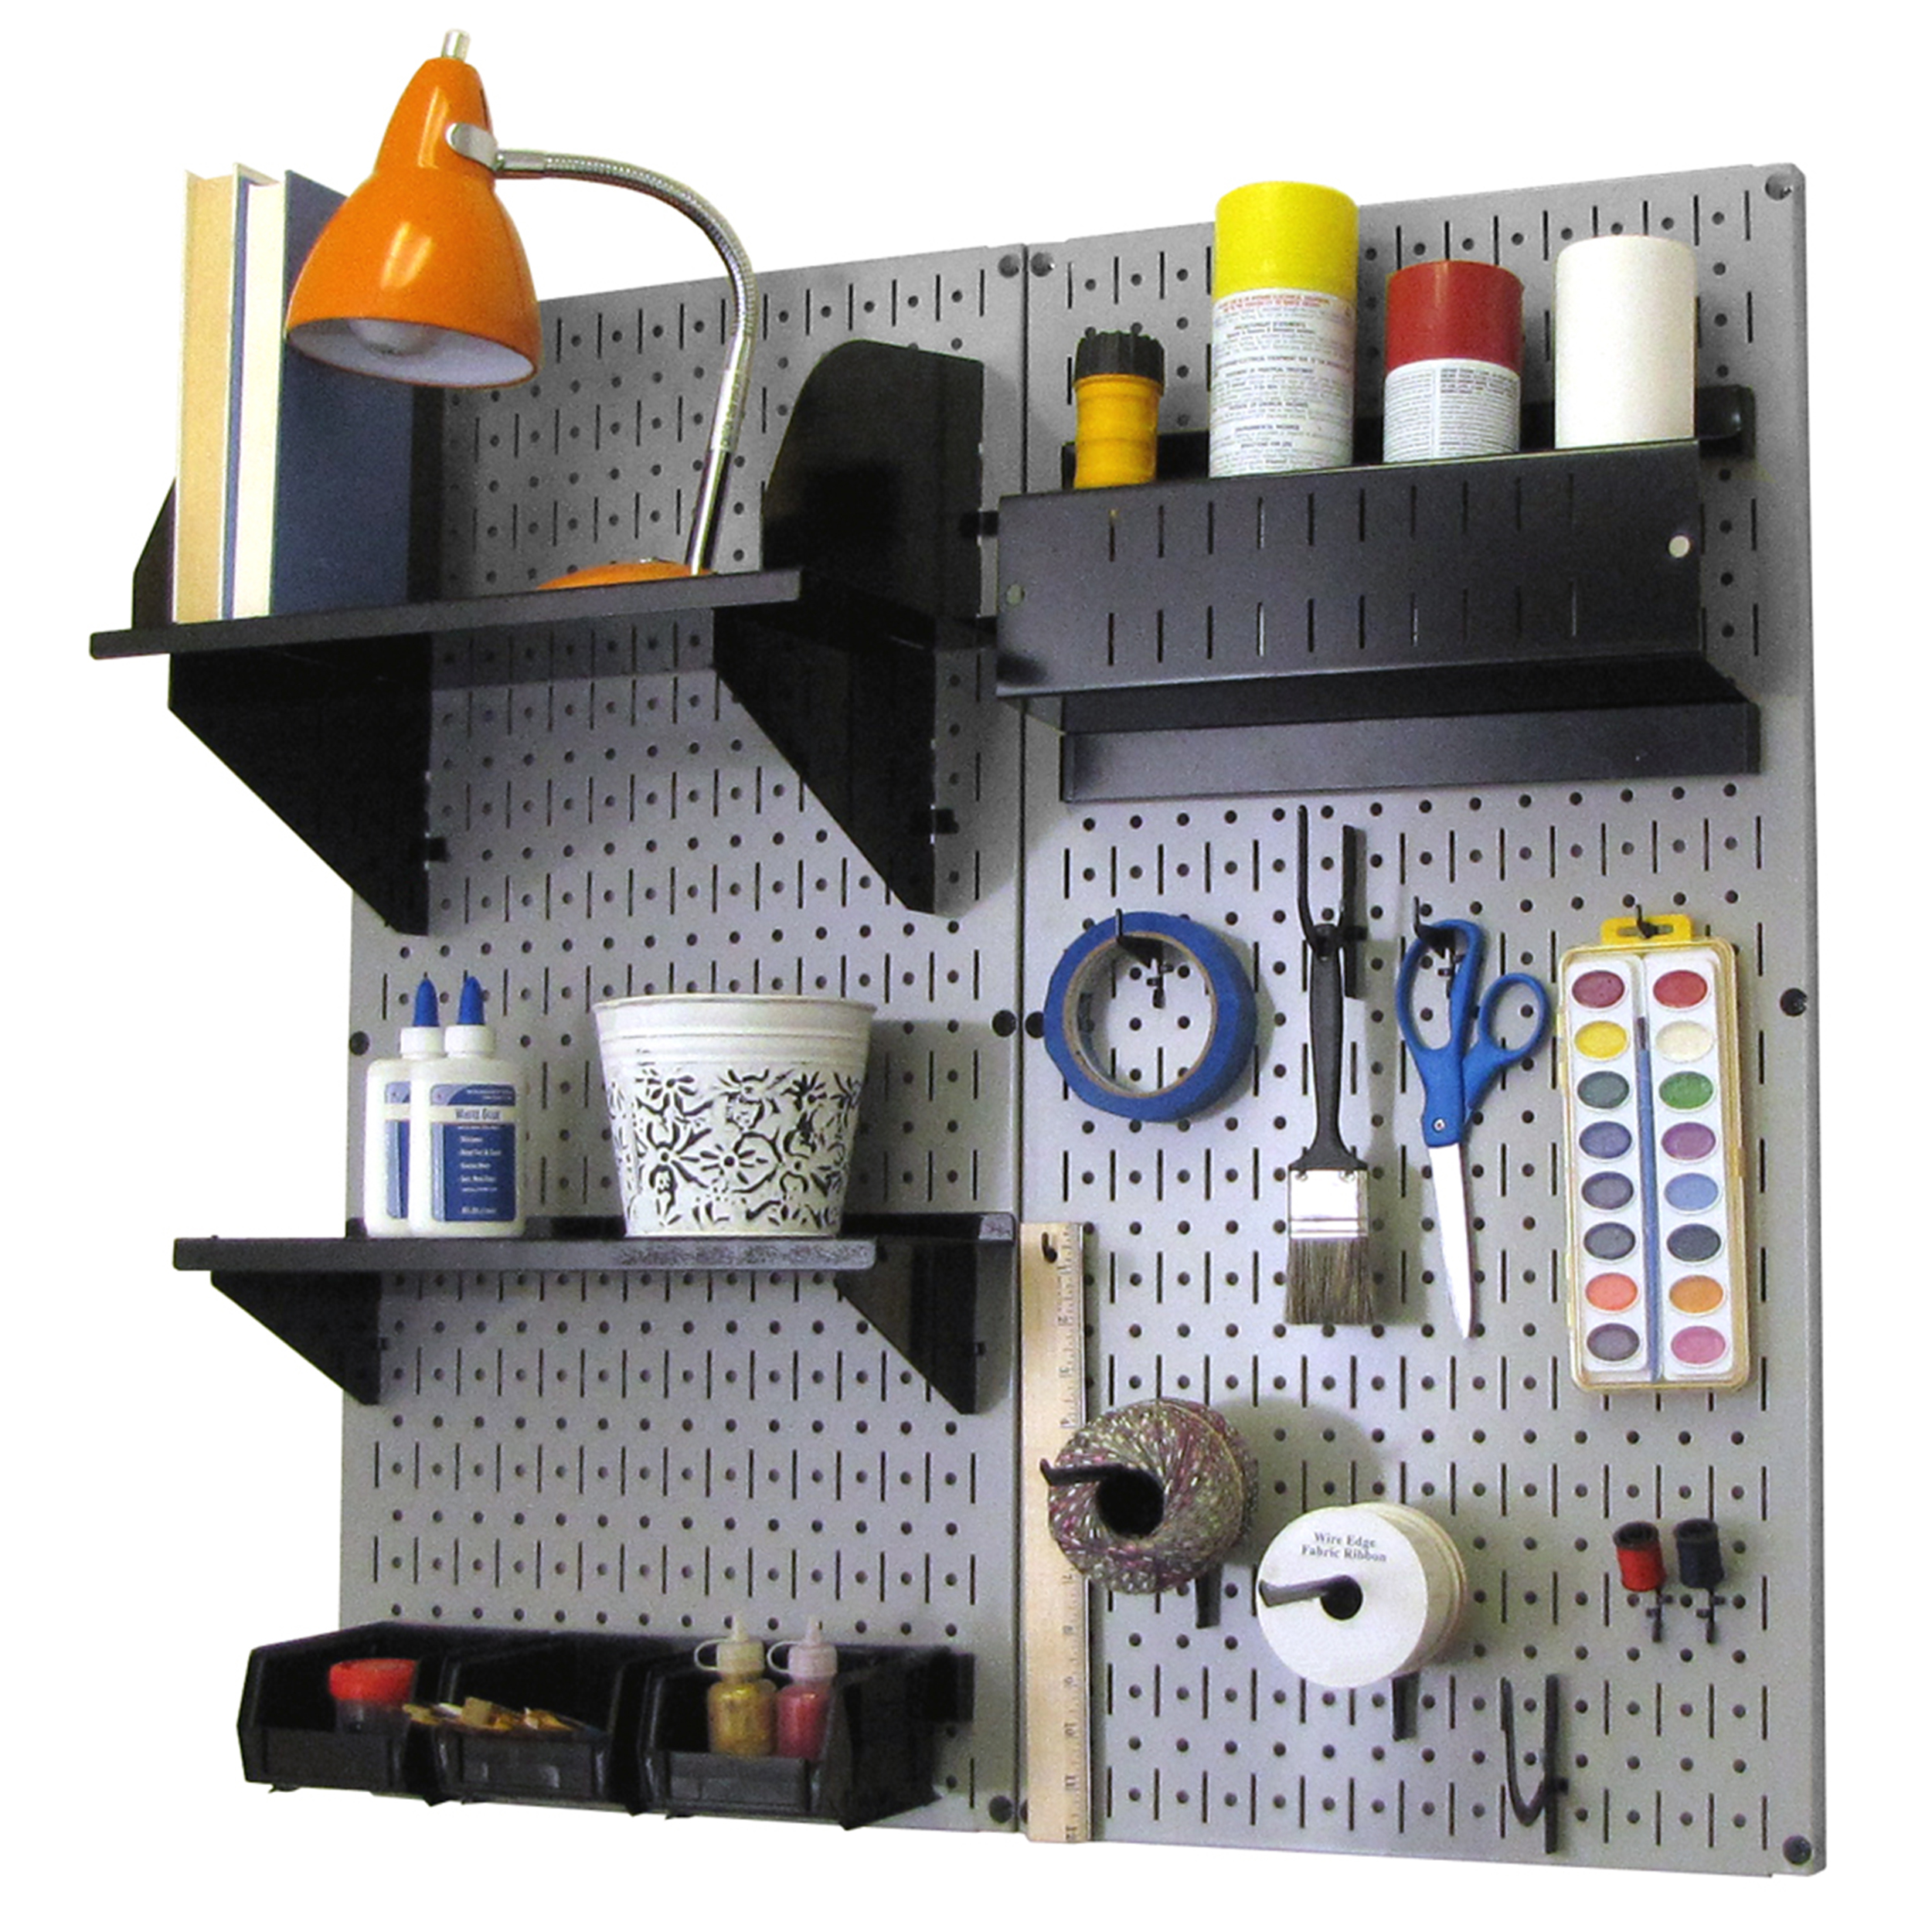 Pegboard Hobby Craft Pegboard Organizer Storage Kit With Gray Pegboard And Black Accessories